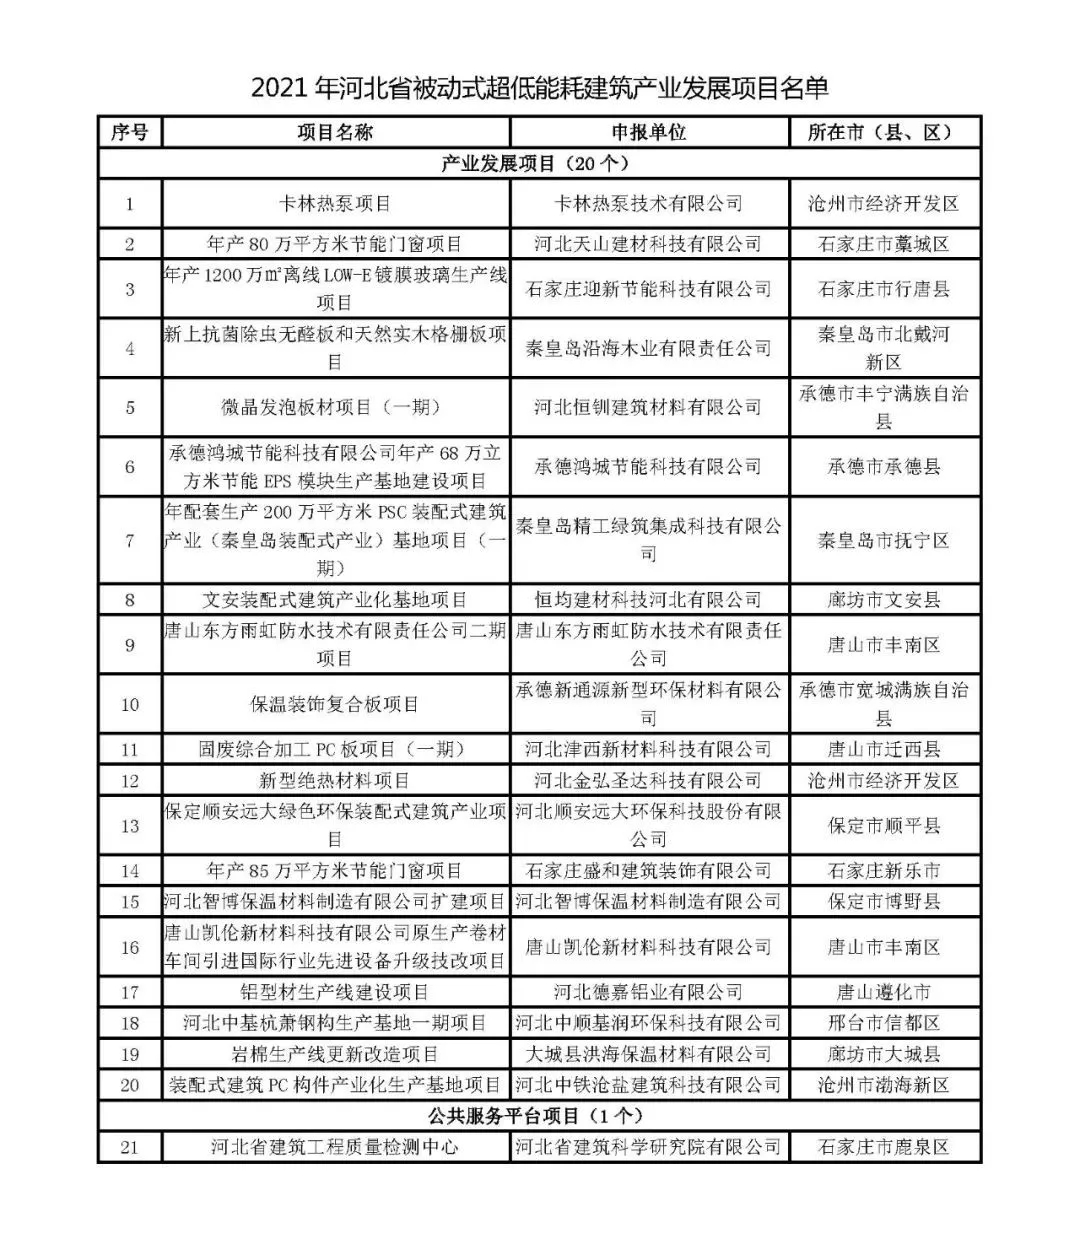 List of passive ultra-low energy consumption construction industry development projects in Hebei Province in 2021